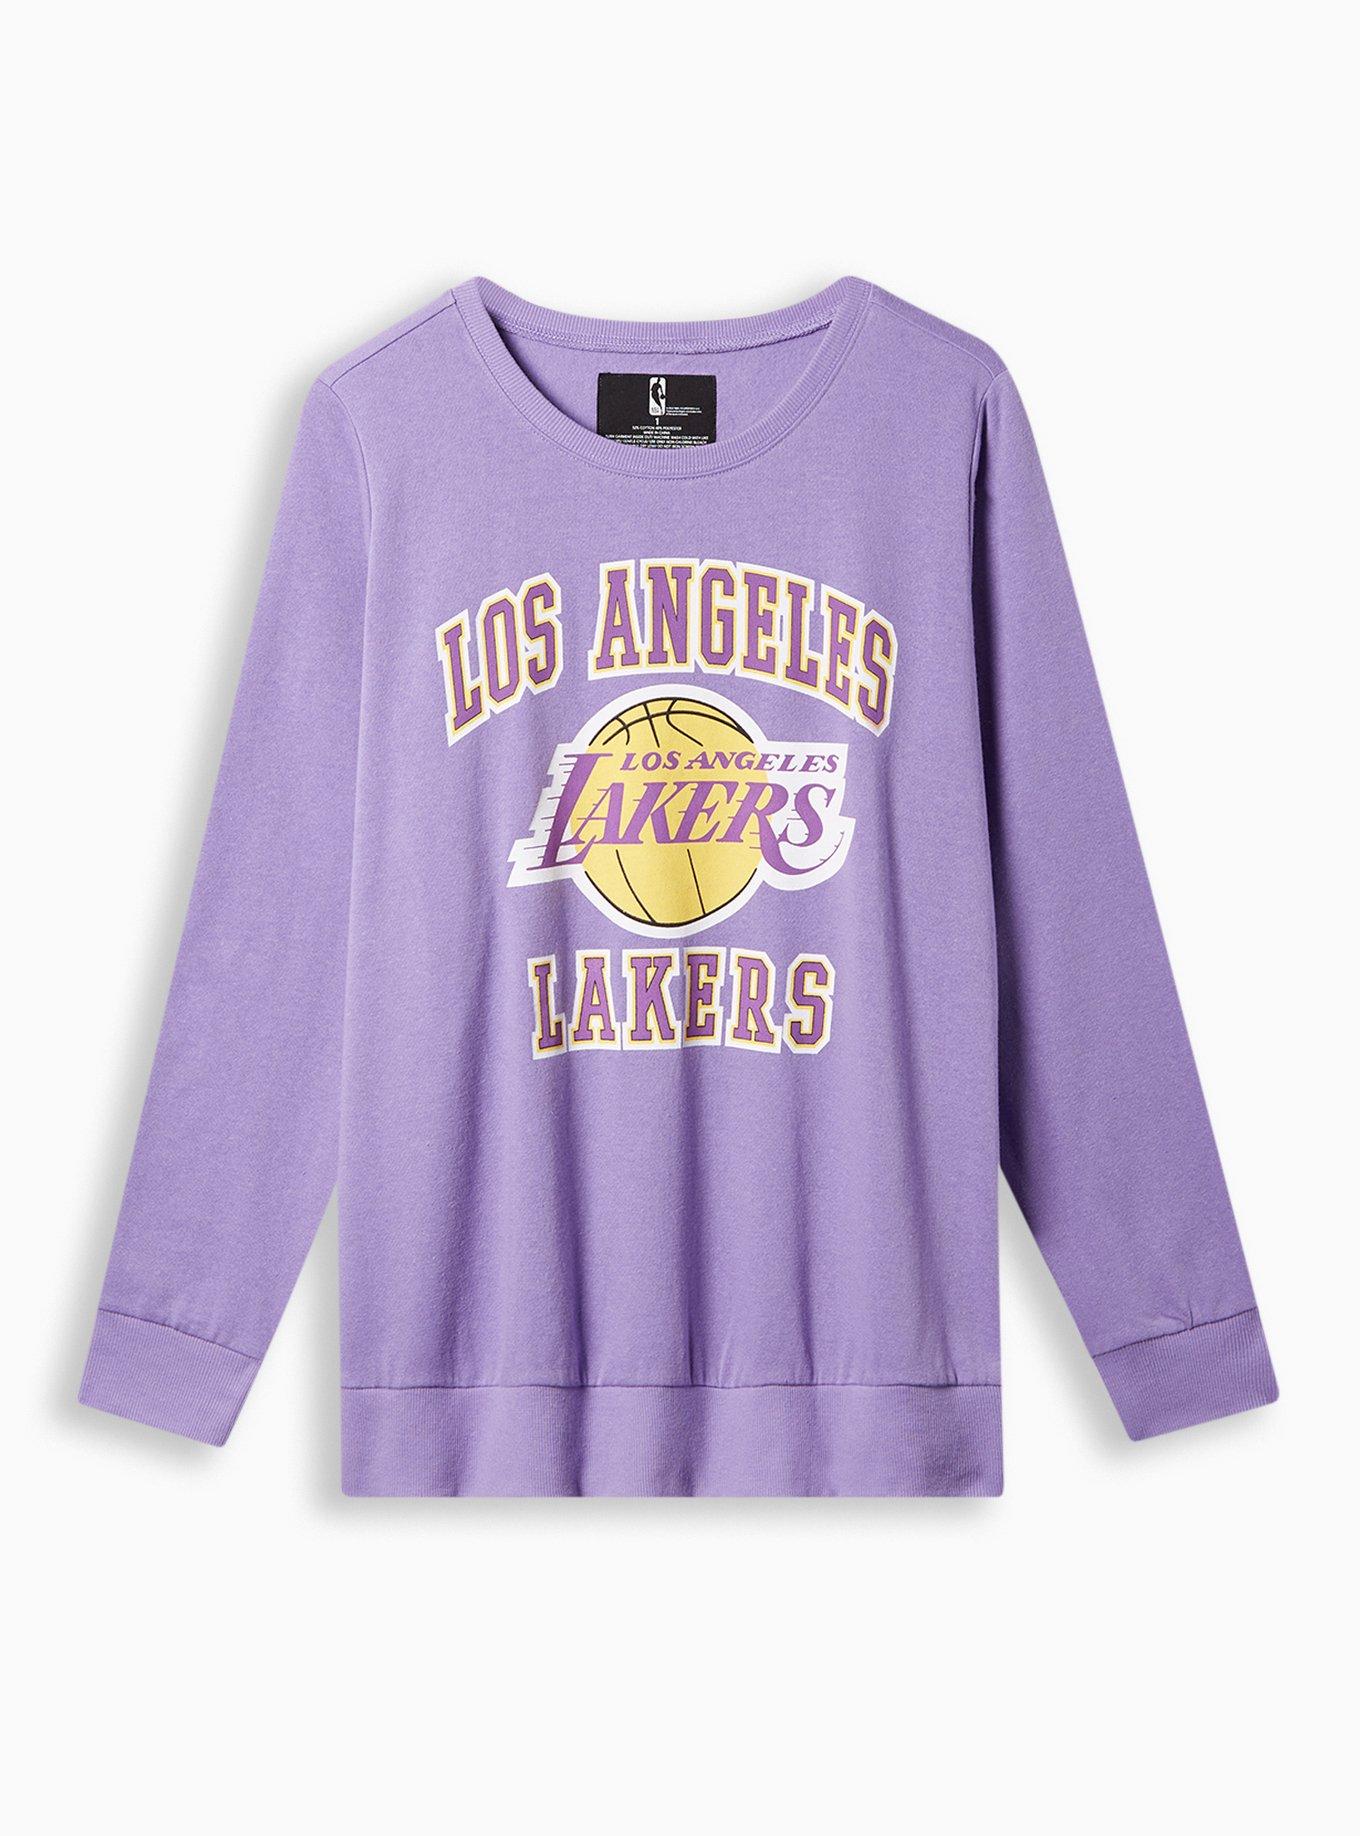  Basketball Lakers Jersey Pullover Jumper Top Slouchy